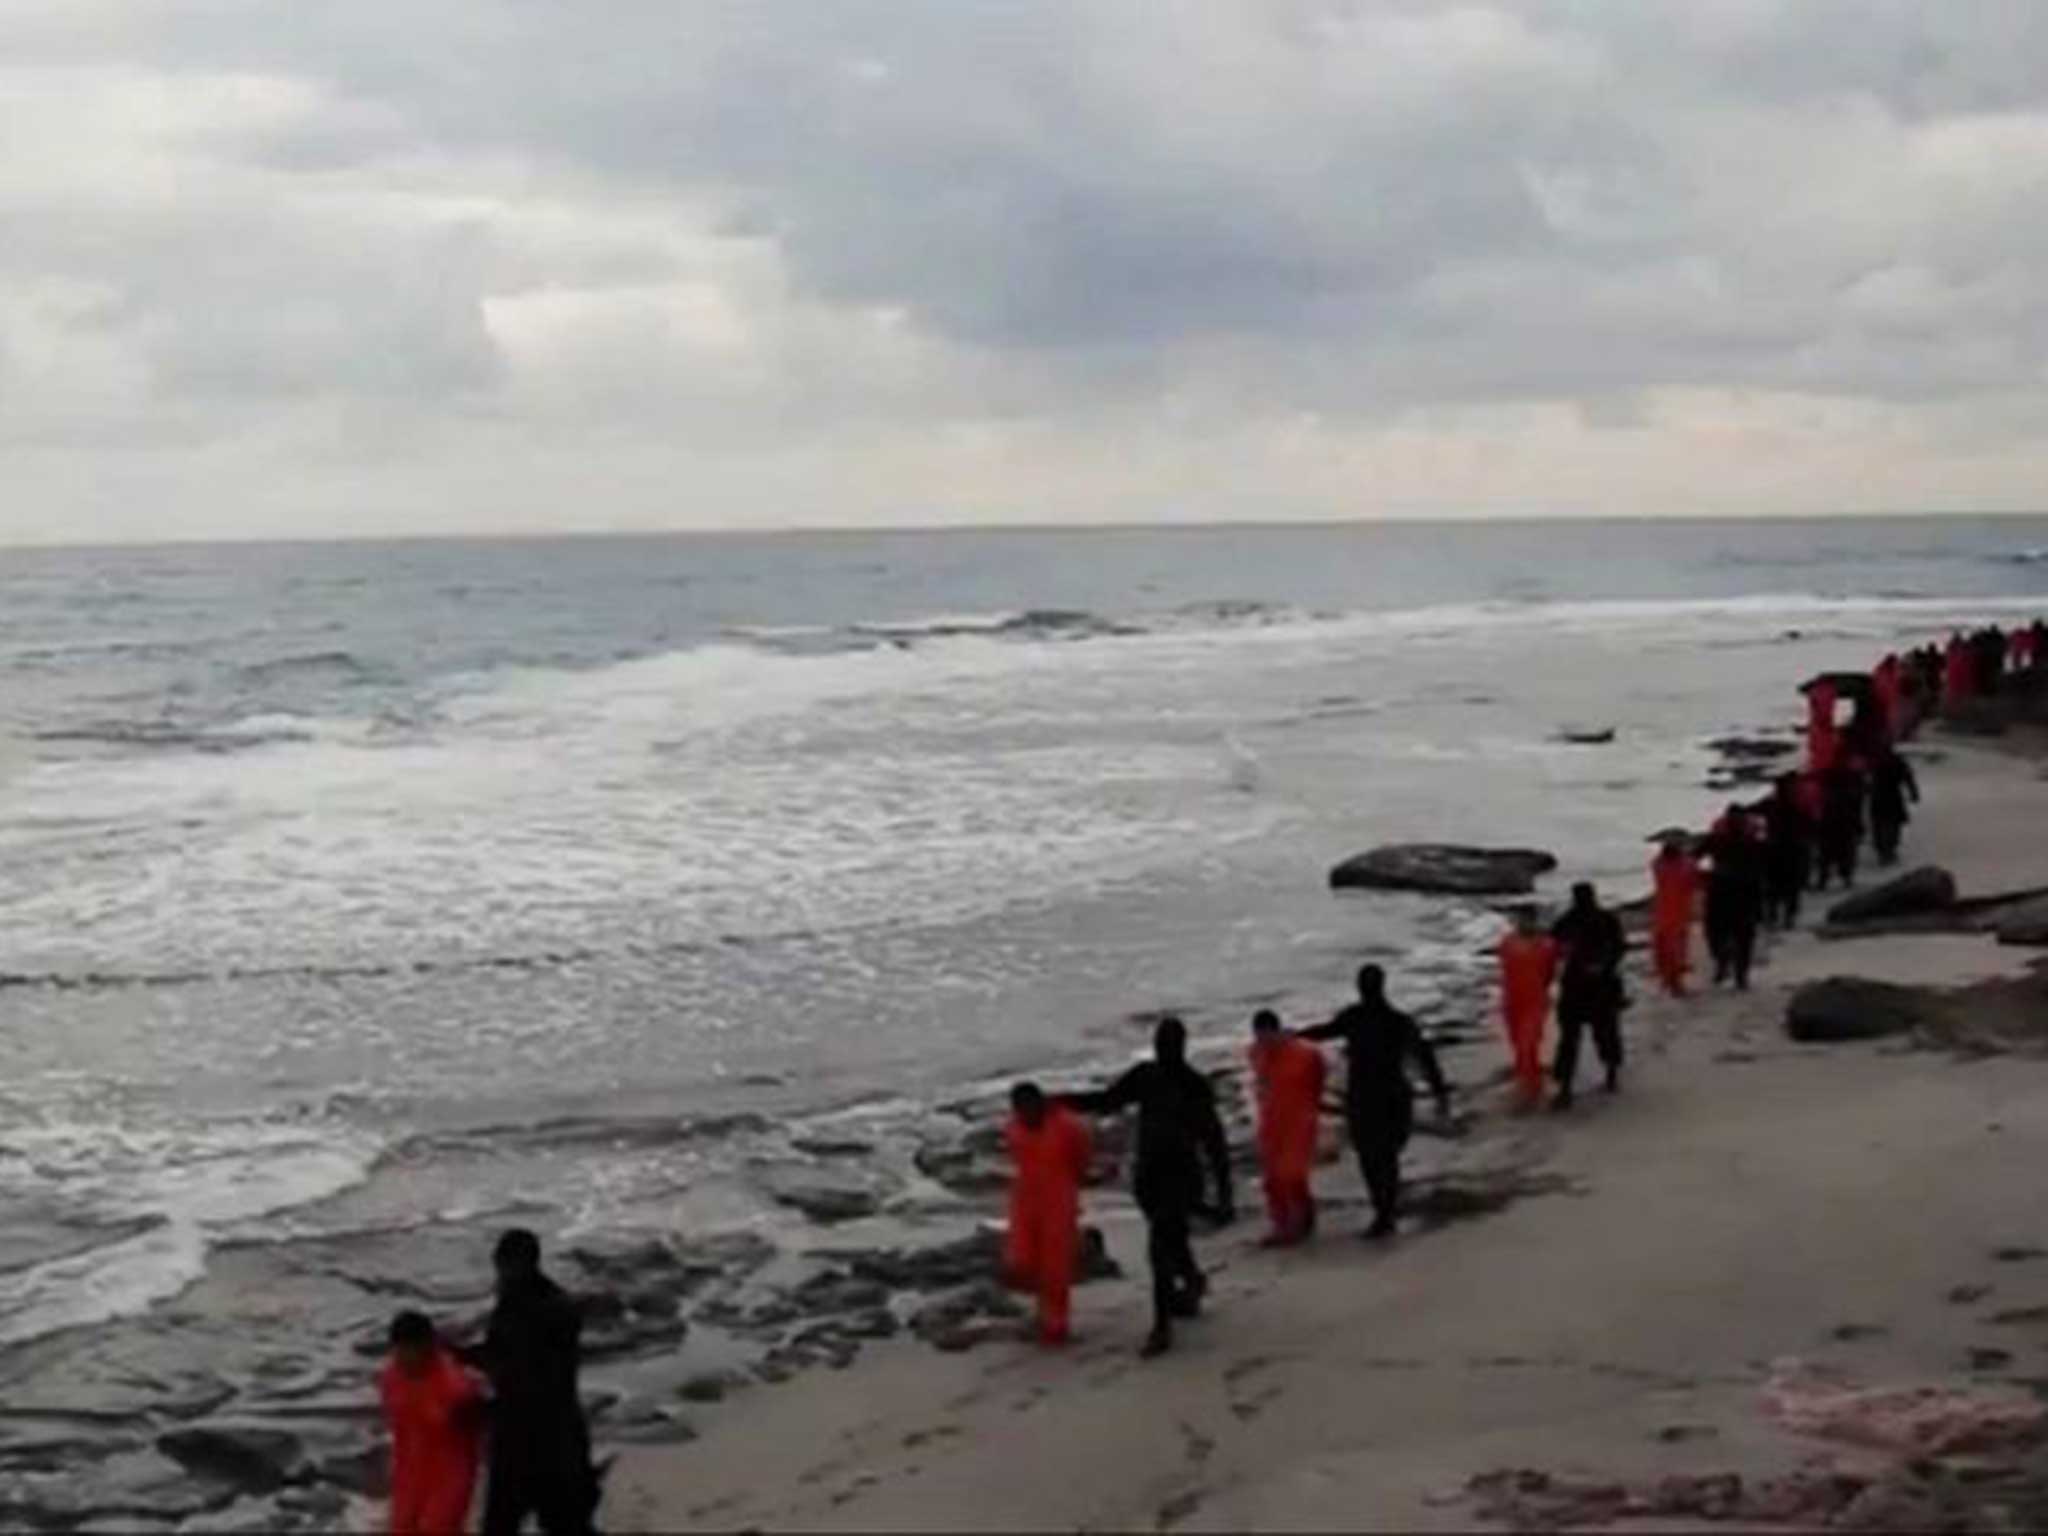 A still from the Isis video, purportedly showing the execution